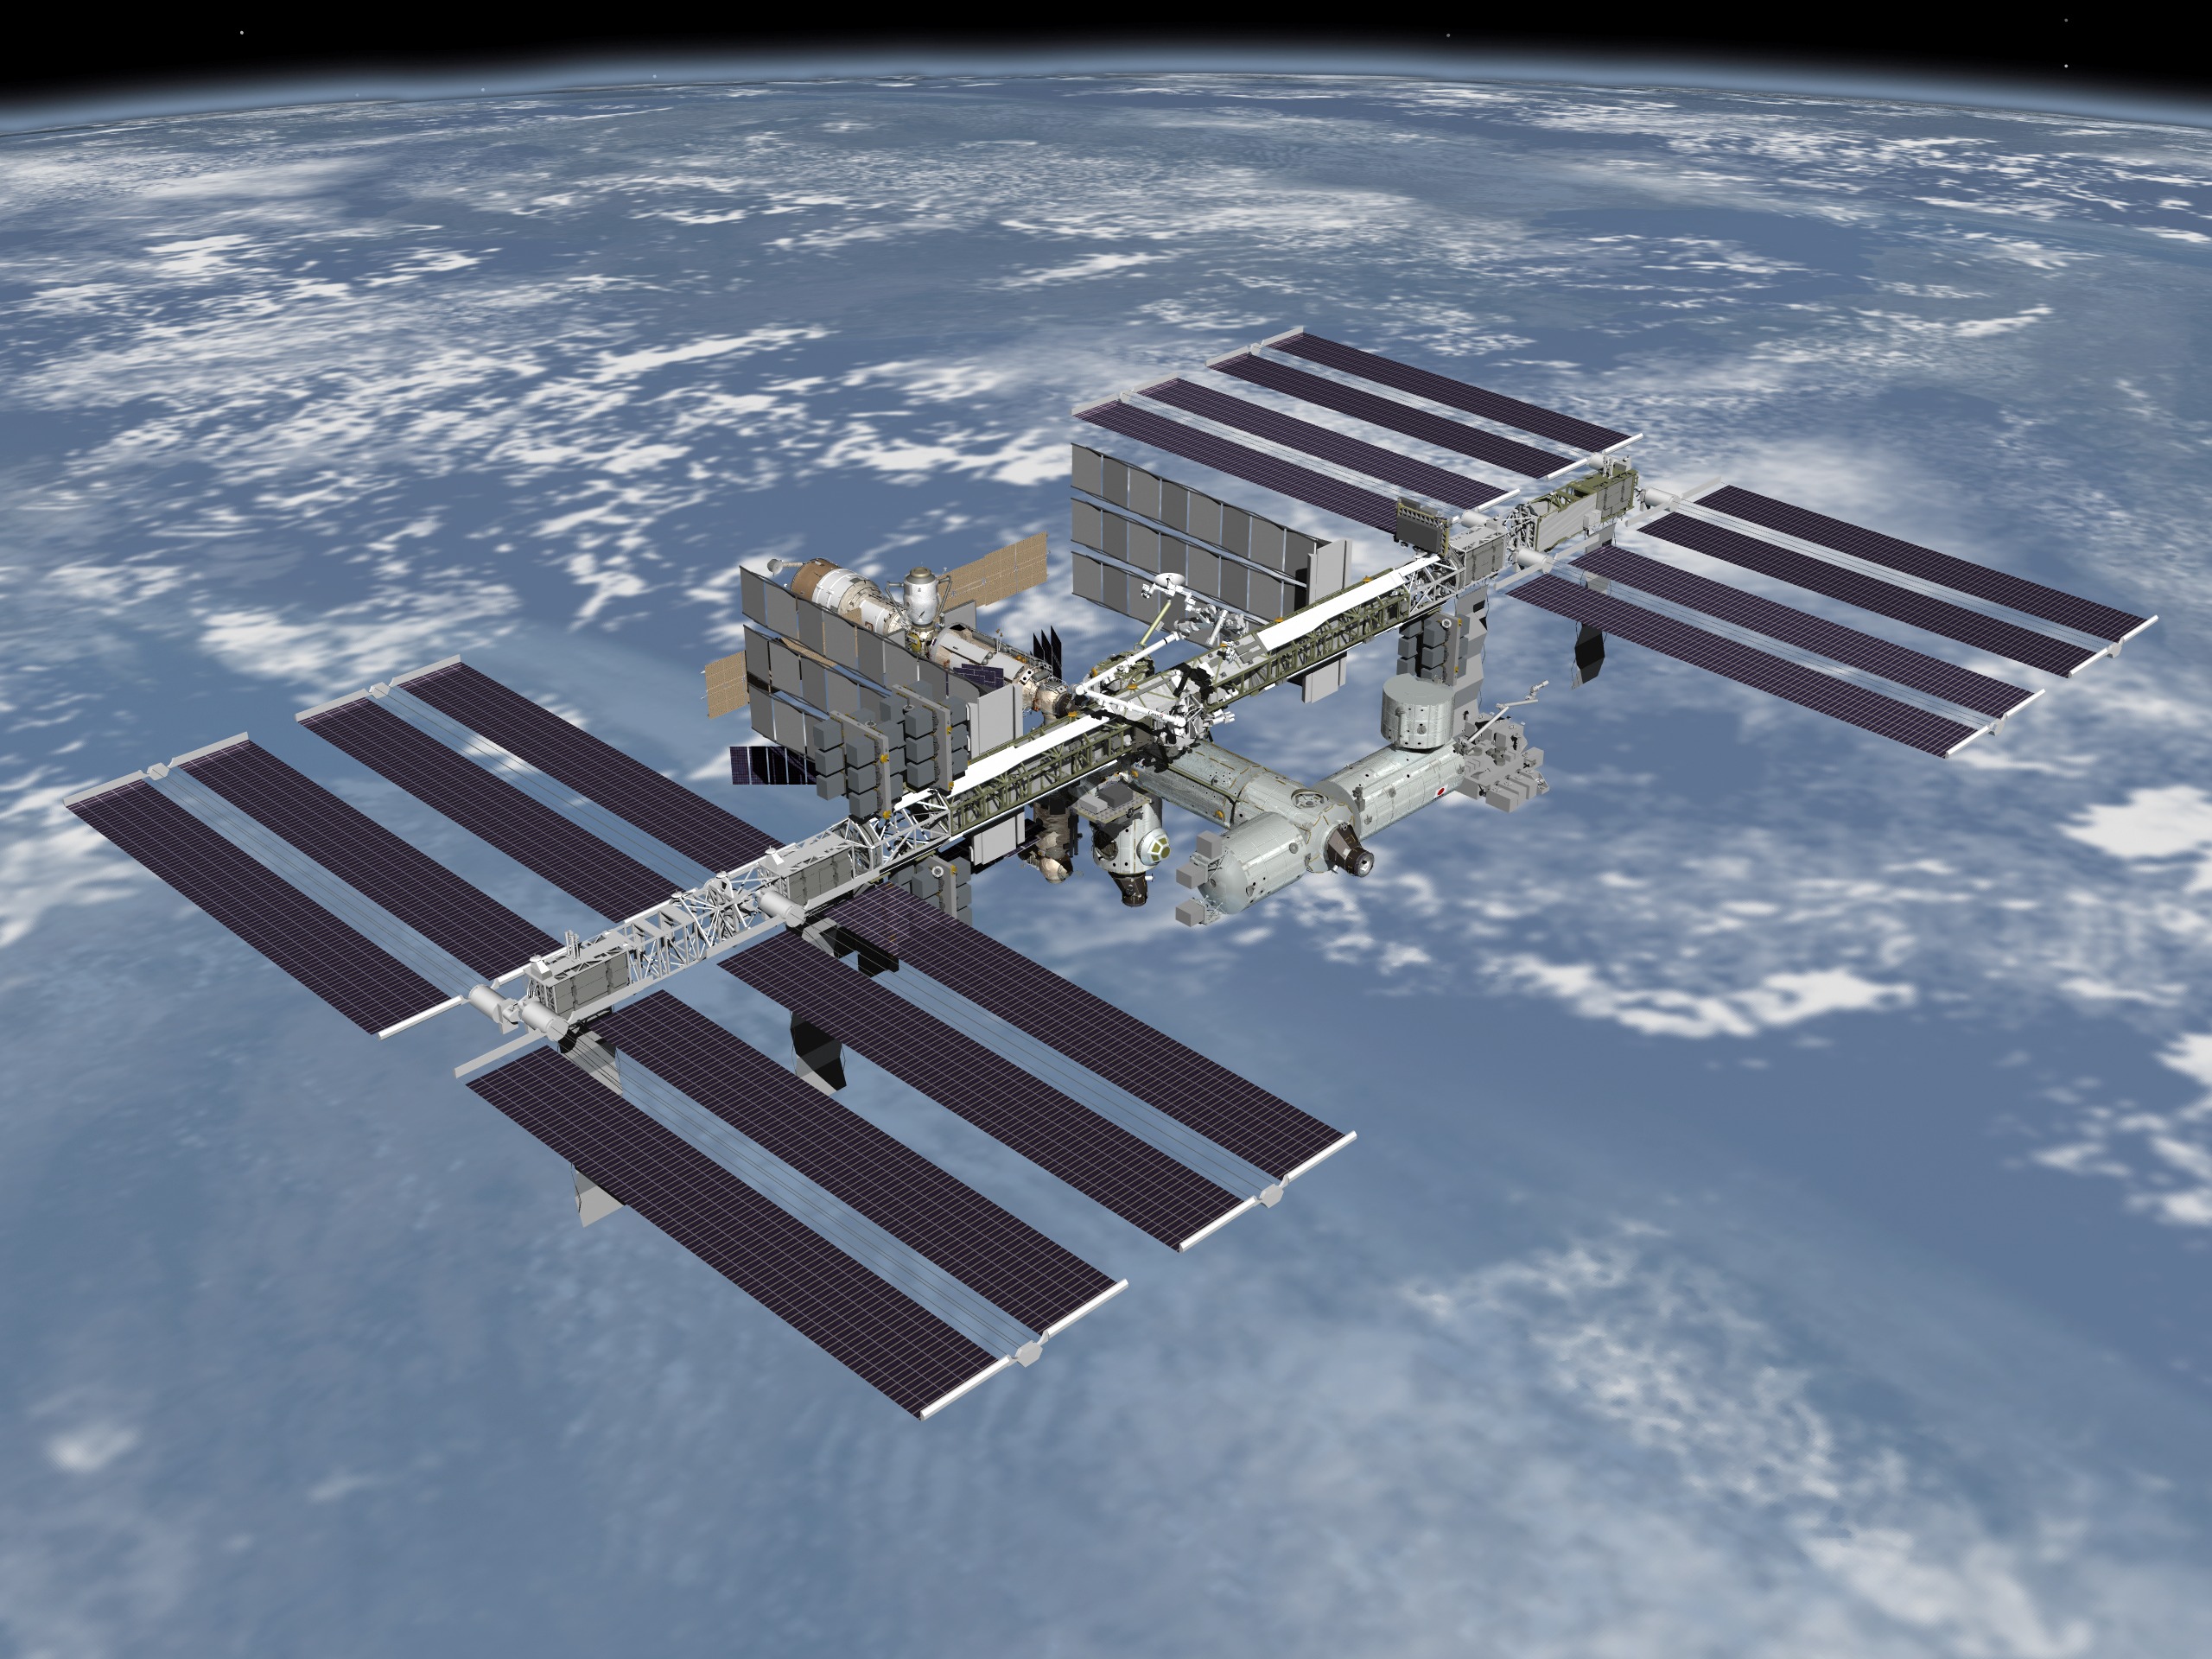 The space station is one of the brightest objects in the sky. Image Credit: NASA 